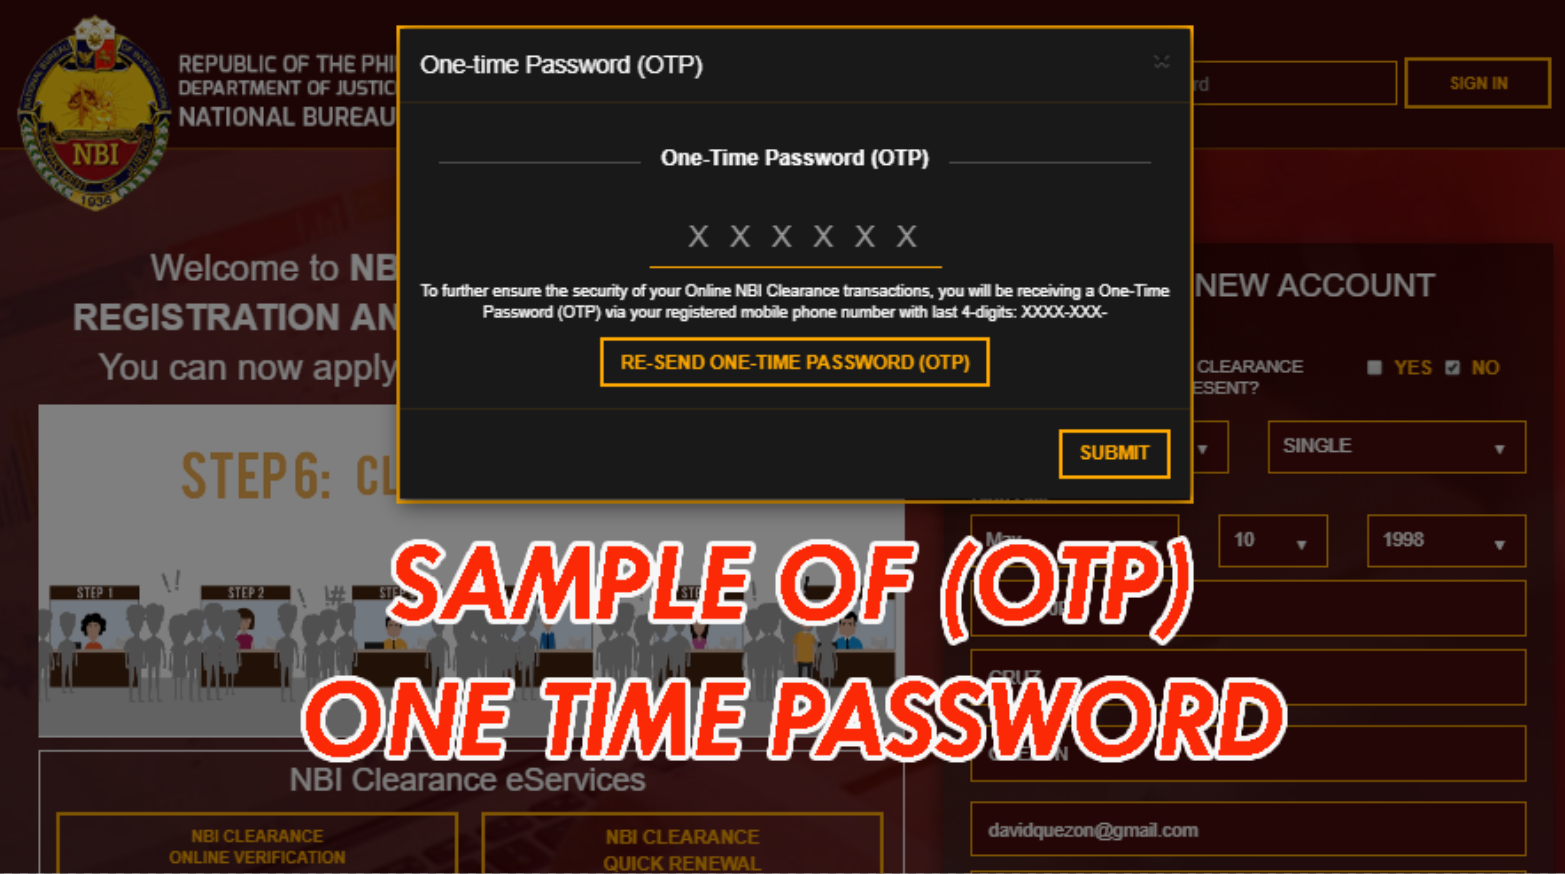 OTP FOR NBI CLEARANCE ONLINE APPLICATION FOR 2020 nbi clearance online NBI CLEARANCE ONLINE APPLICATION FOR 2020 SAMPLE OF OTP ONE TIME PASSWORD